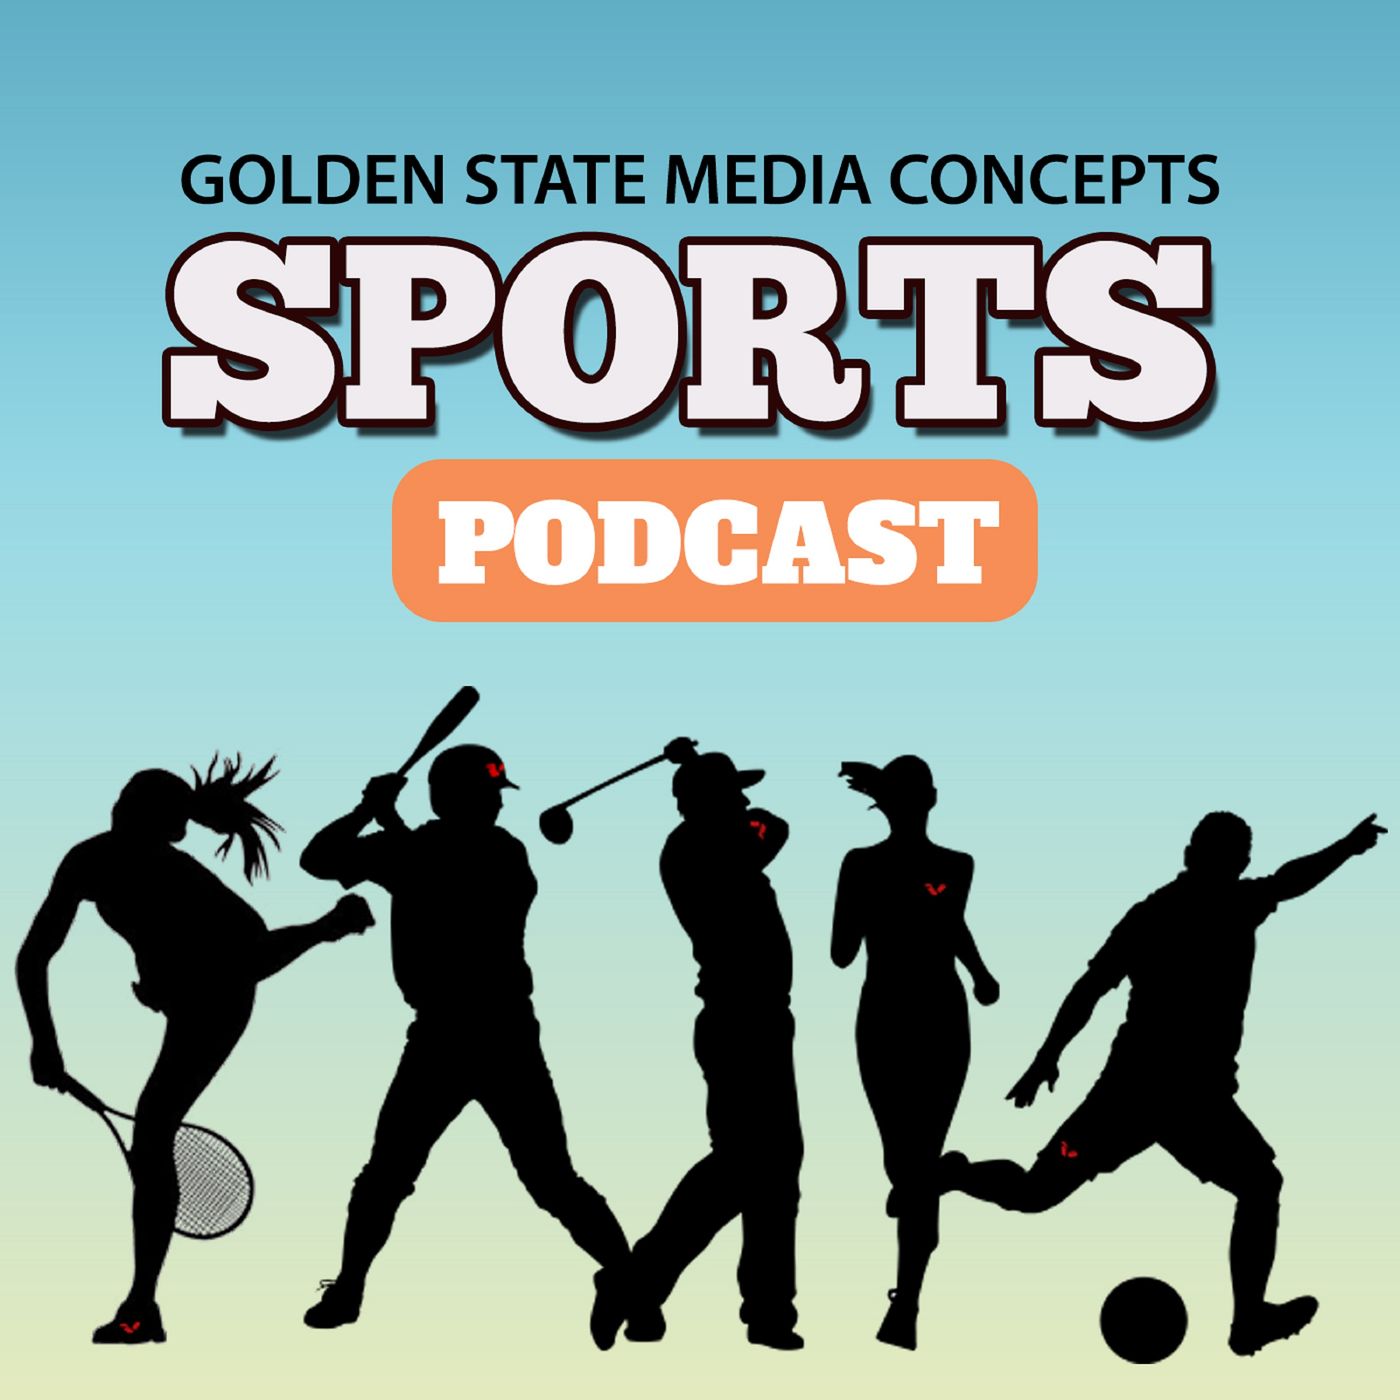 Power Rankings for CBB Teams Remaining & Coaching Carousel | GSMC Sports Podcast